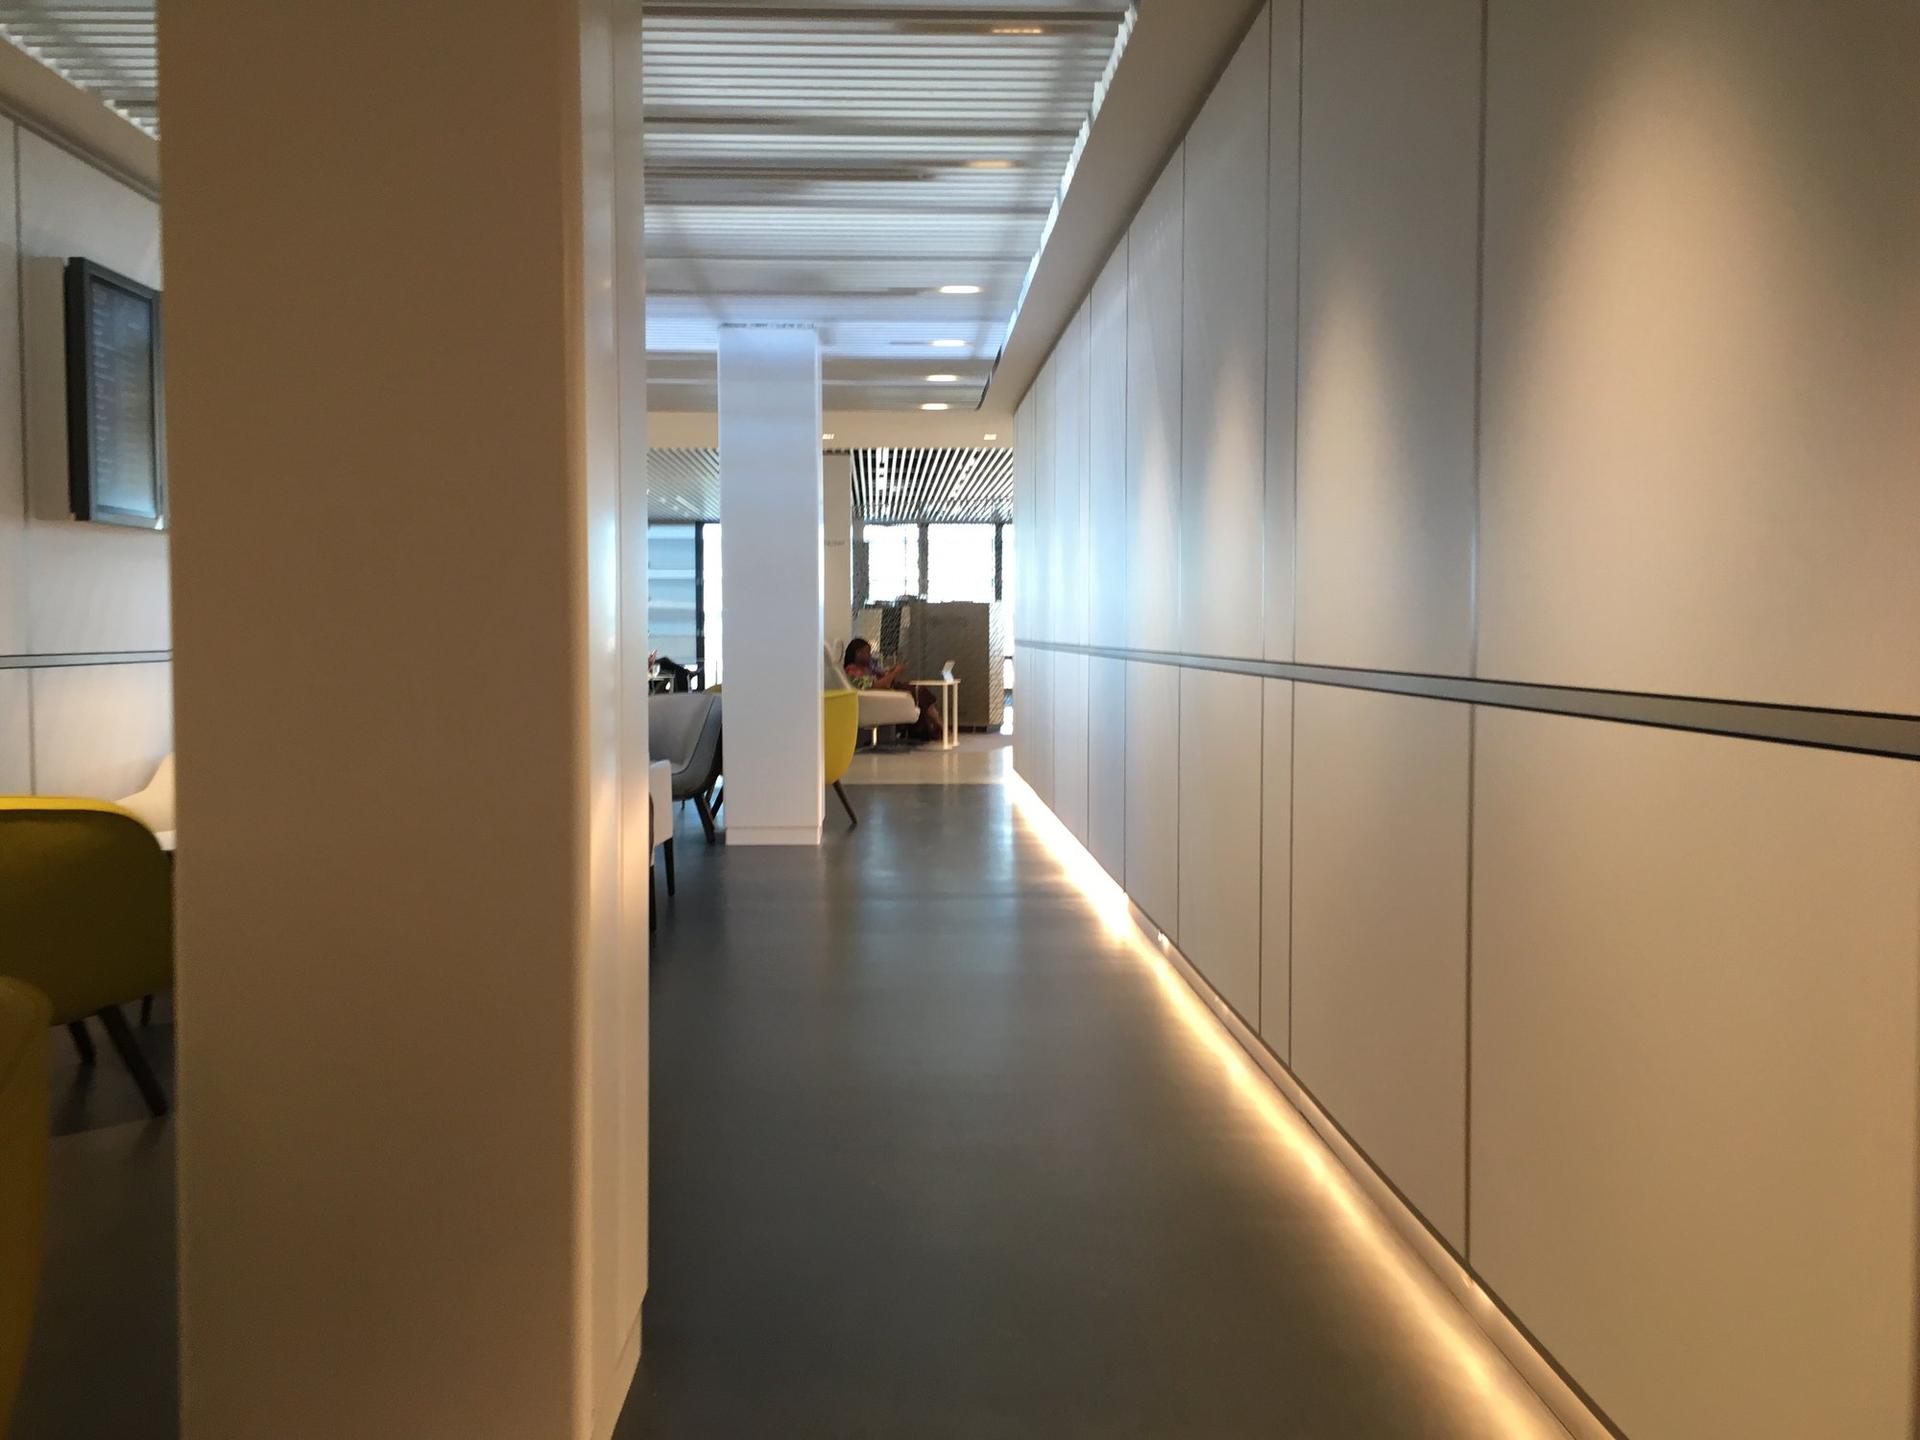 Air France Lounge (Concourse L) image 31 of 57